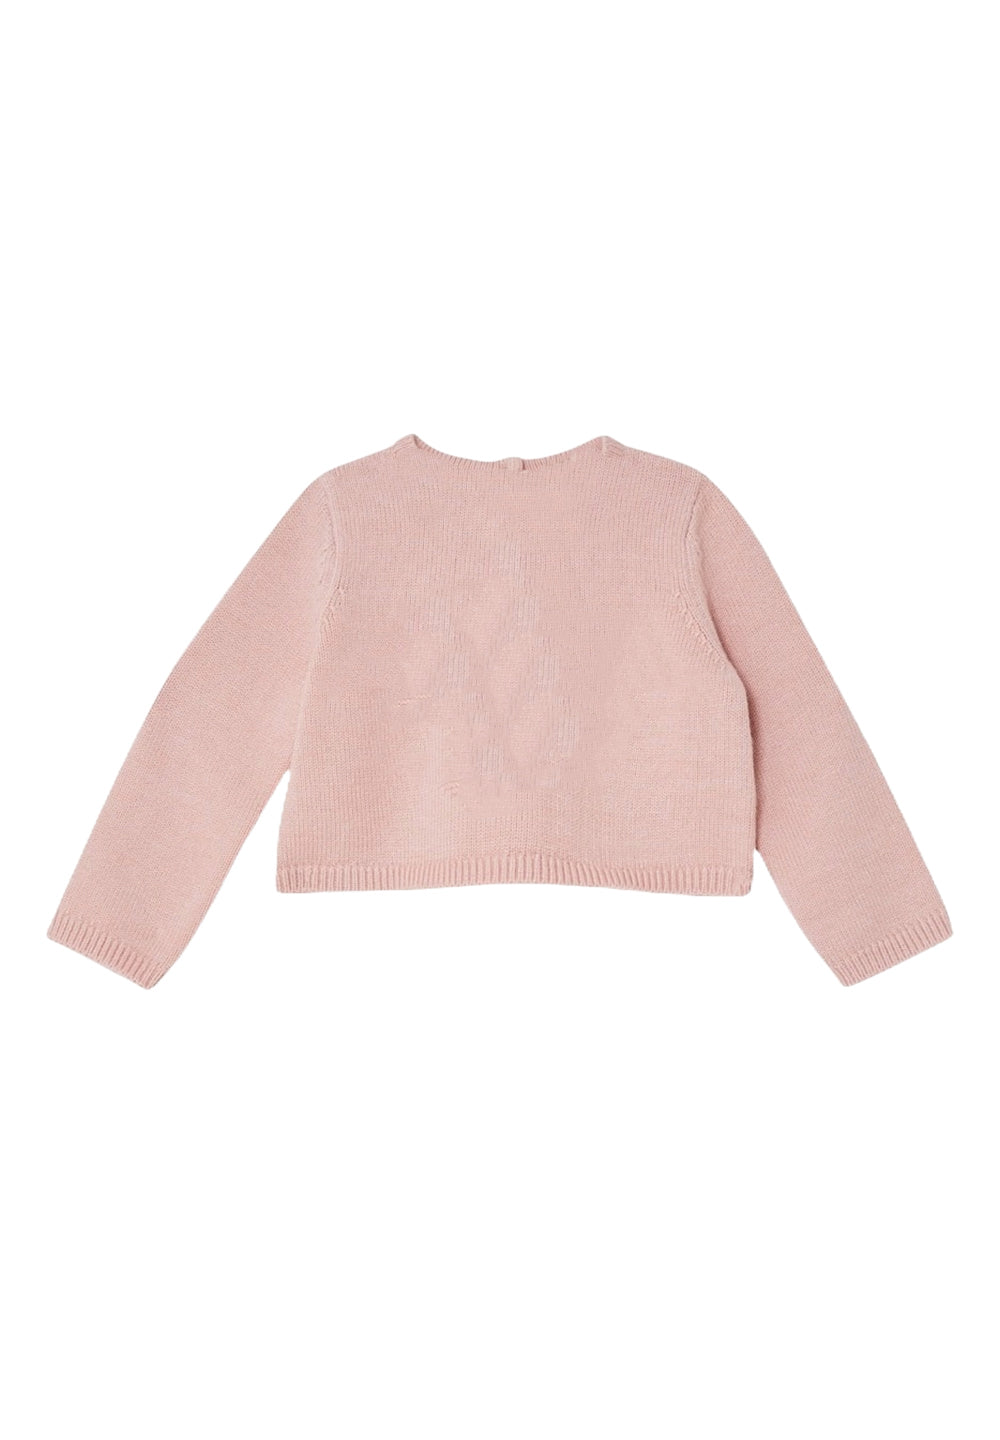 Pink sweater for baby girl